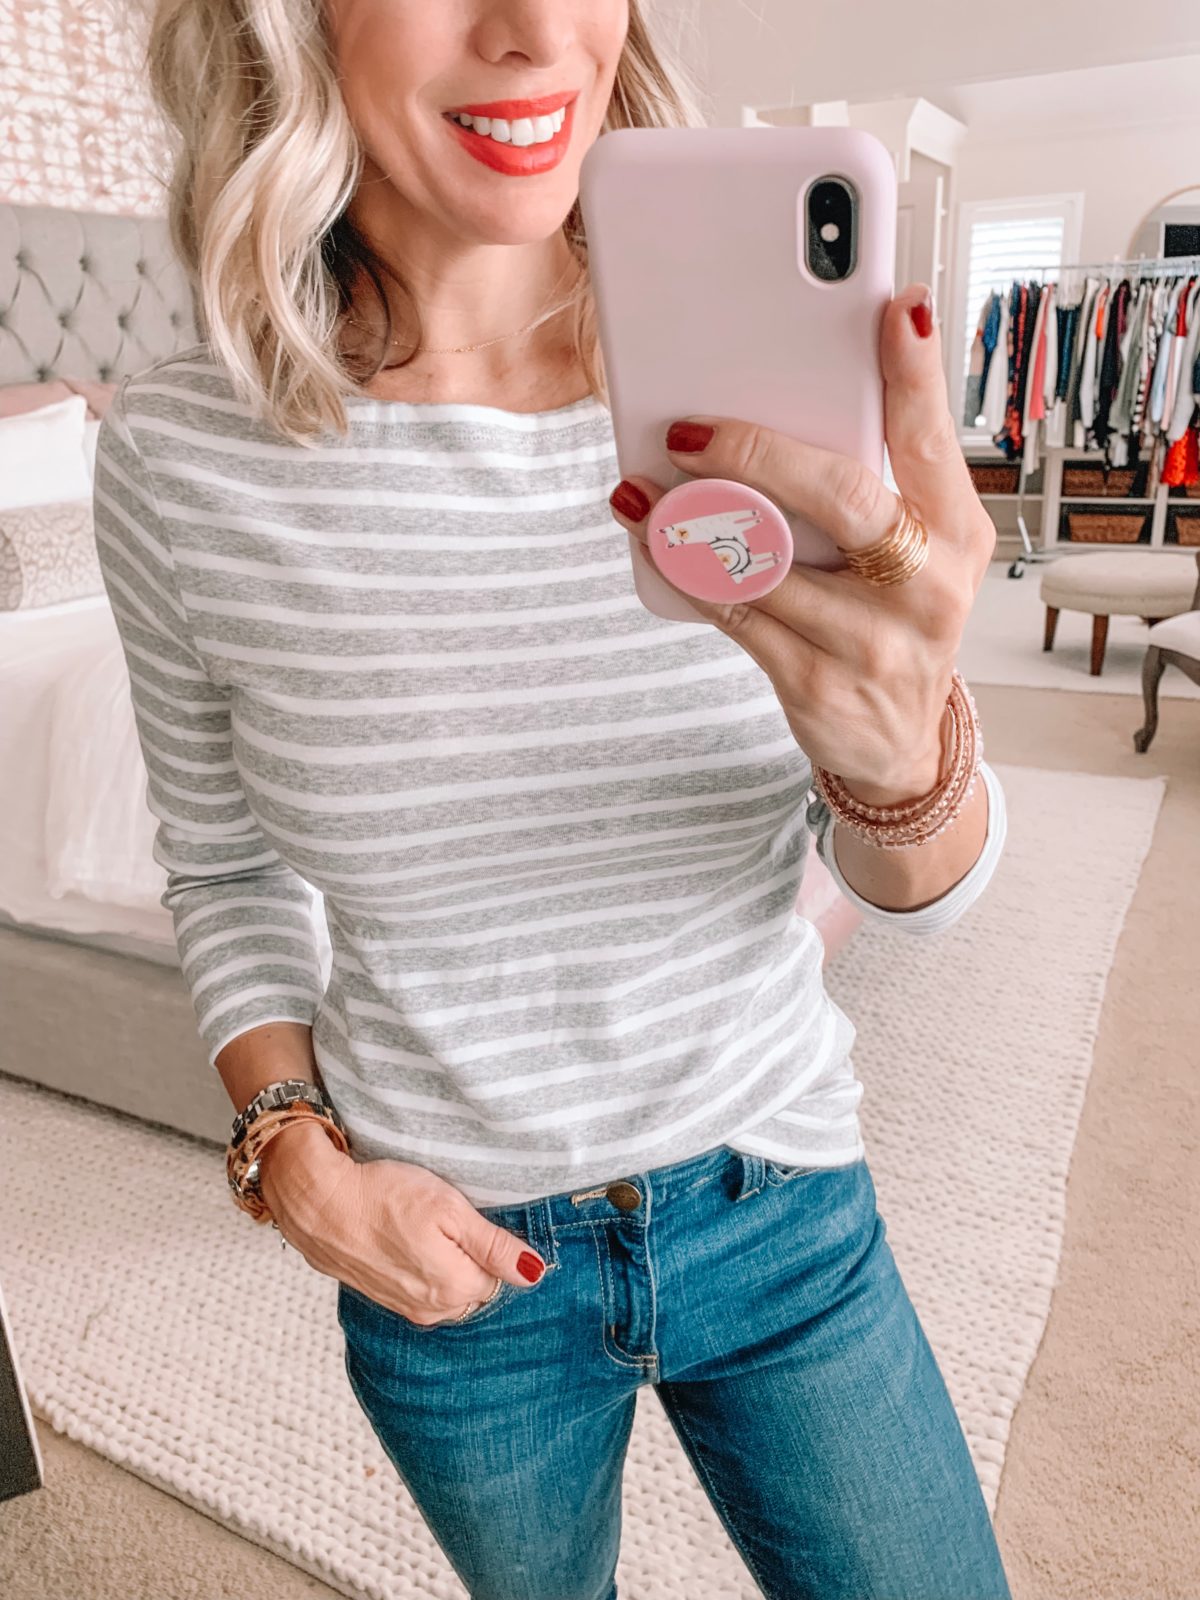 Amazon Prime Fashion- Striped Top and Jeans 